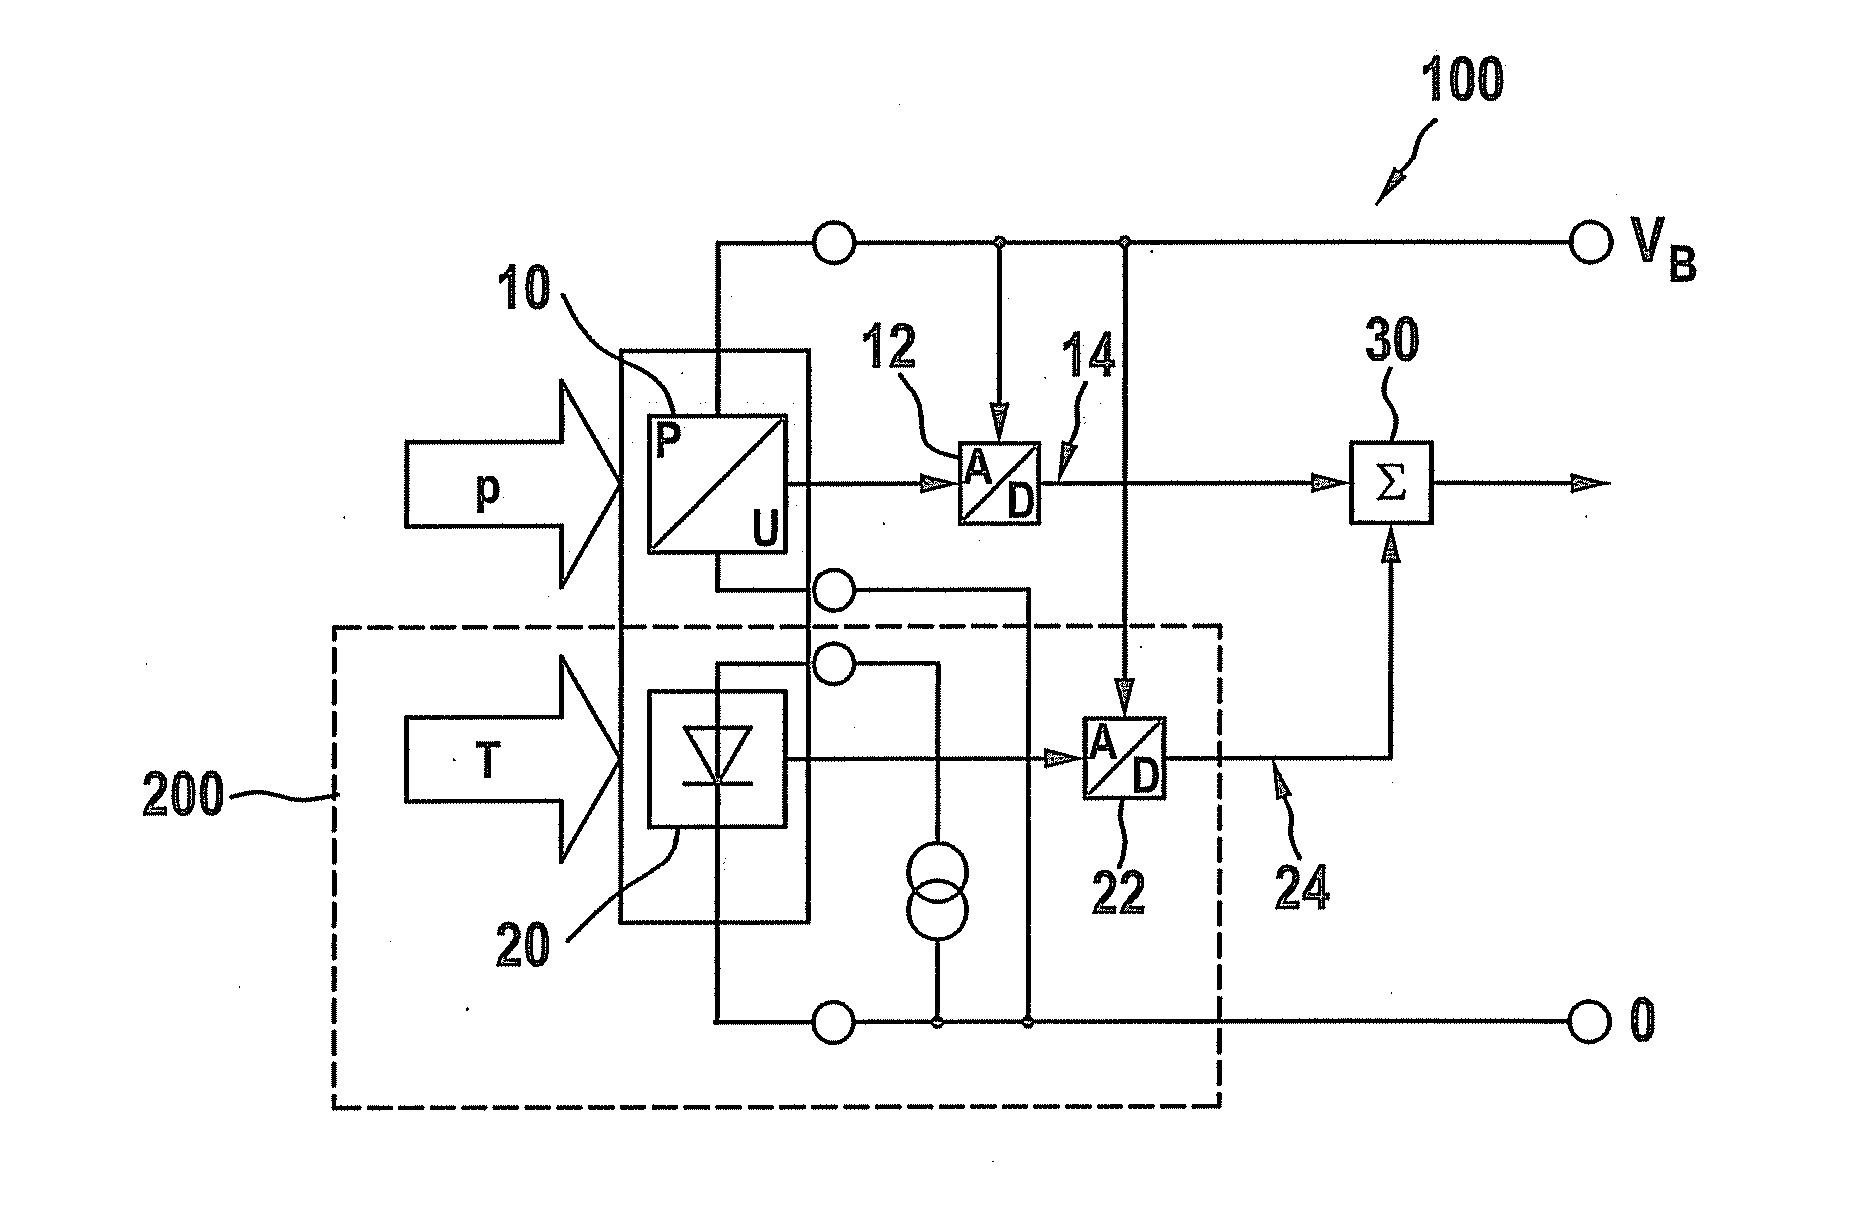 Temperature detection device having a diode and an analog-digital converter